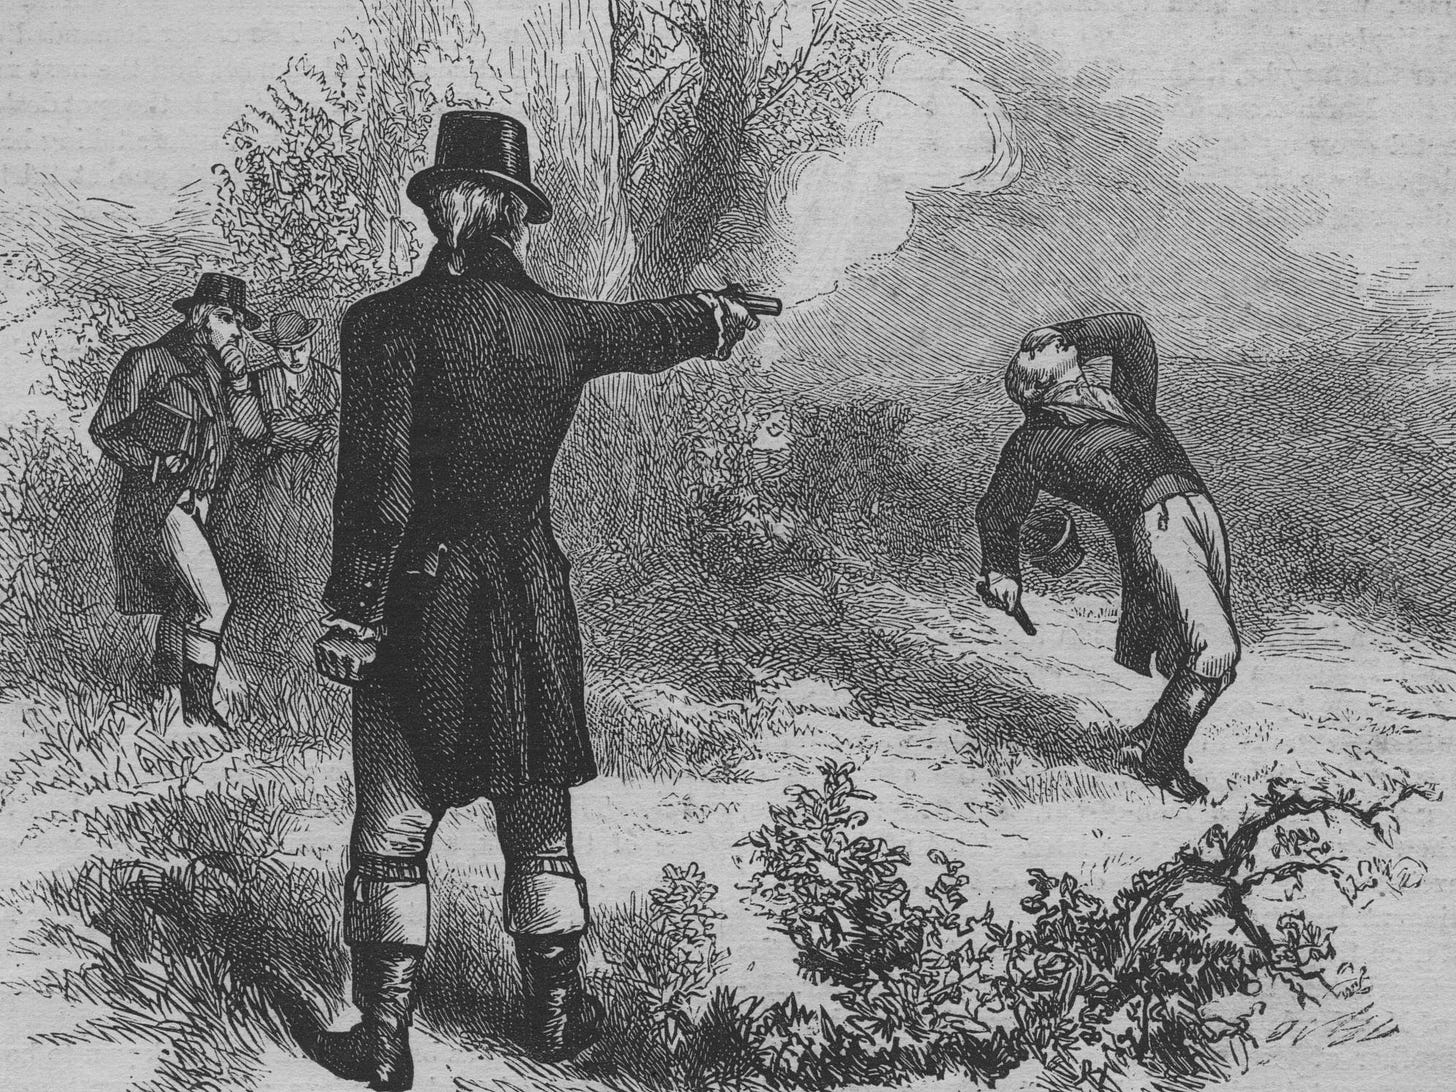 A sketching of a duel between two men. The man in the foreground facing away from us is in a tophat and has his pistol extended. The man in the background is falling backward, his hand holding his eye, his gun at his side. Two men are watching.